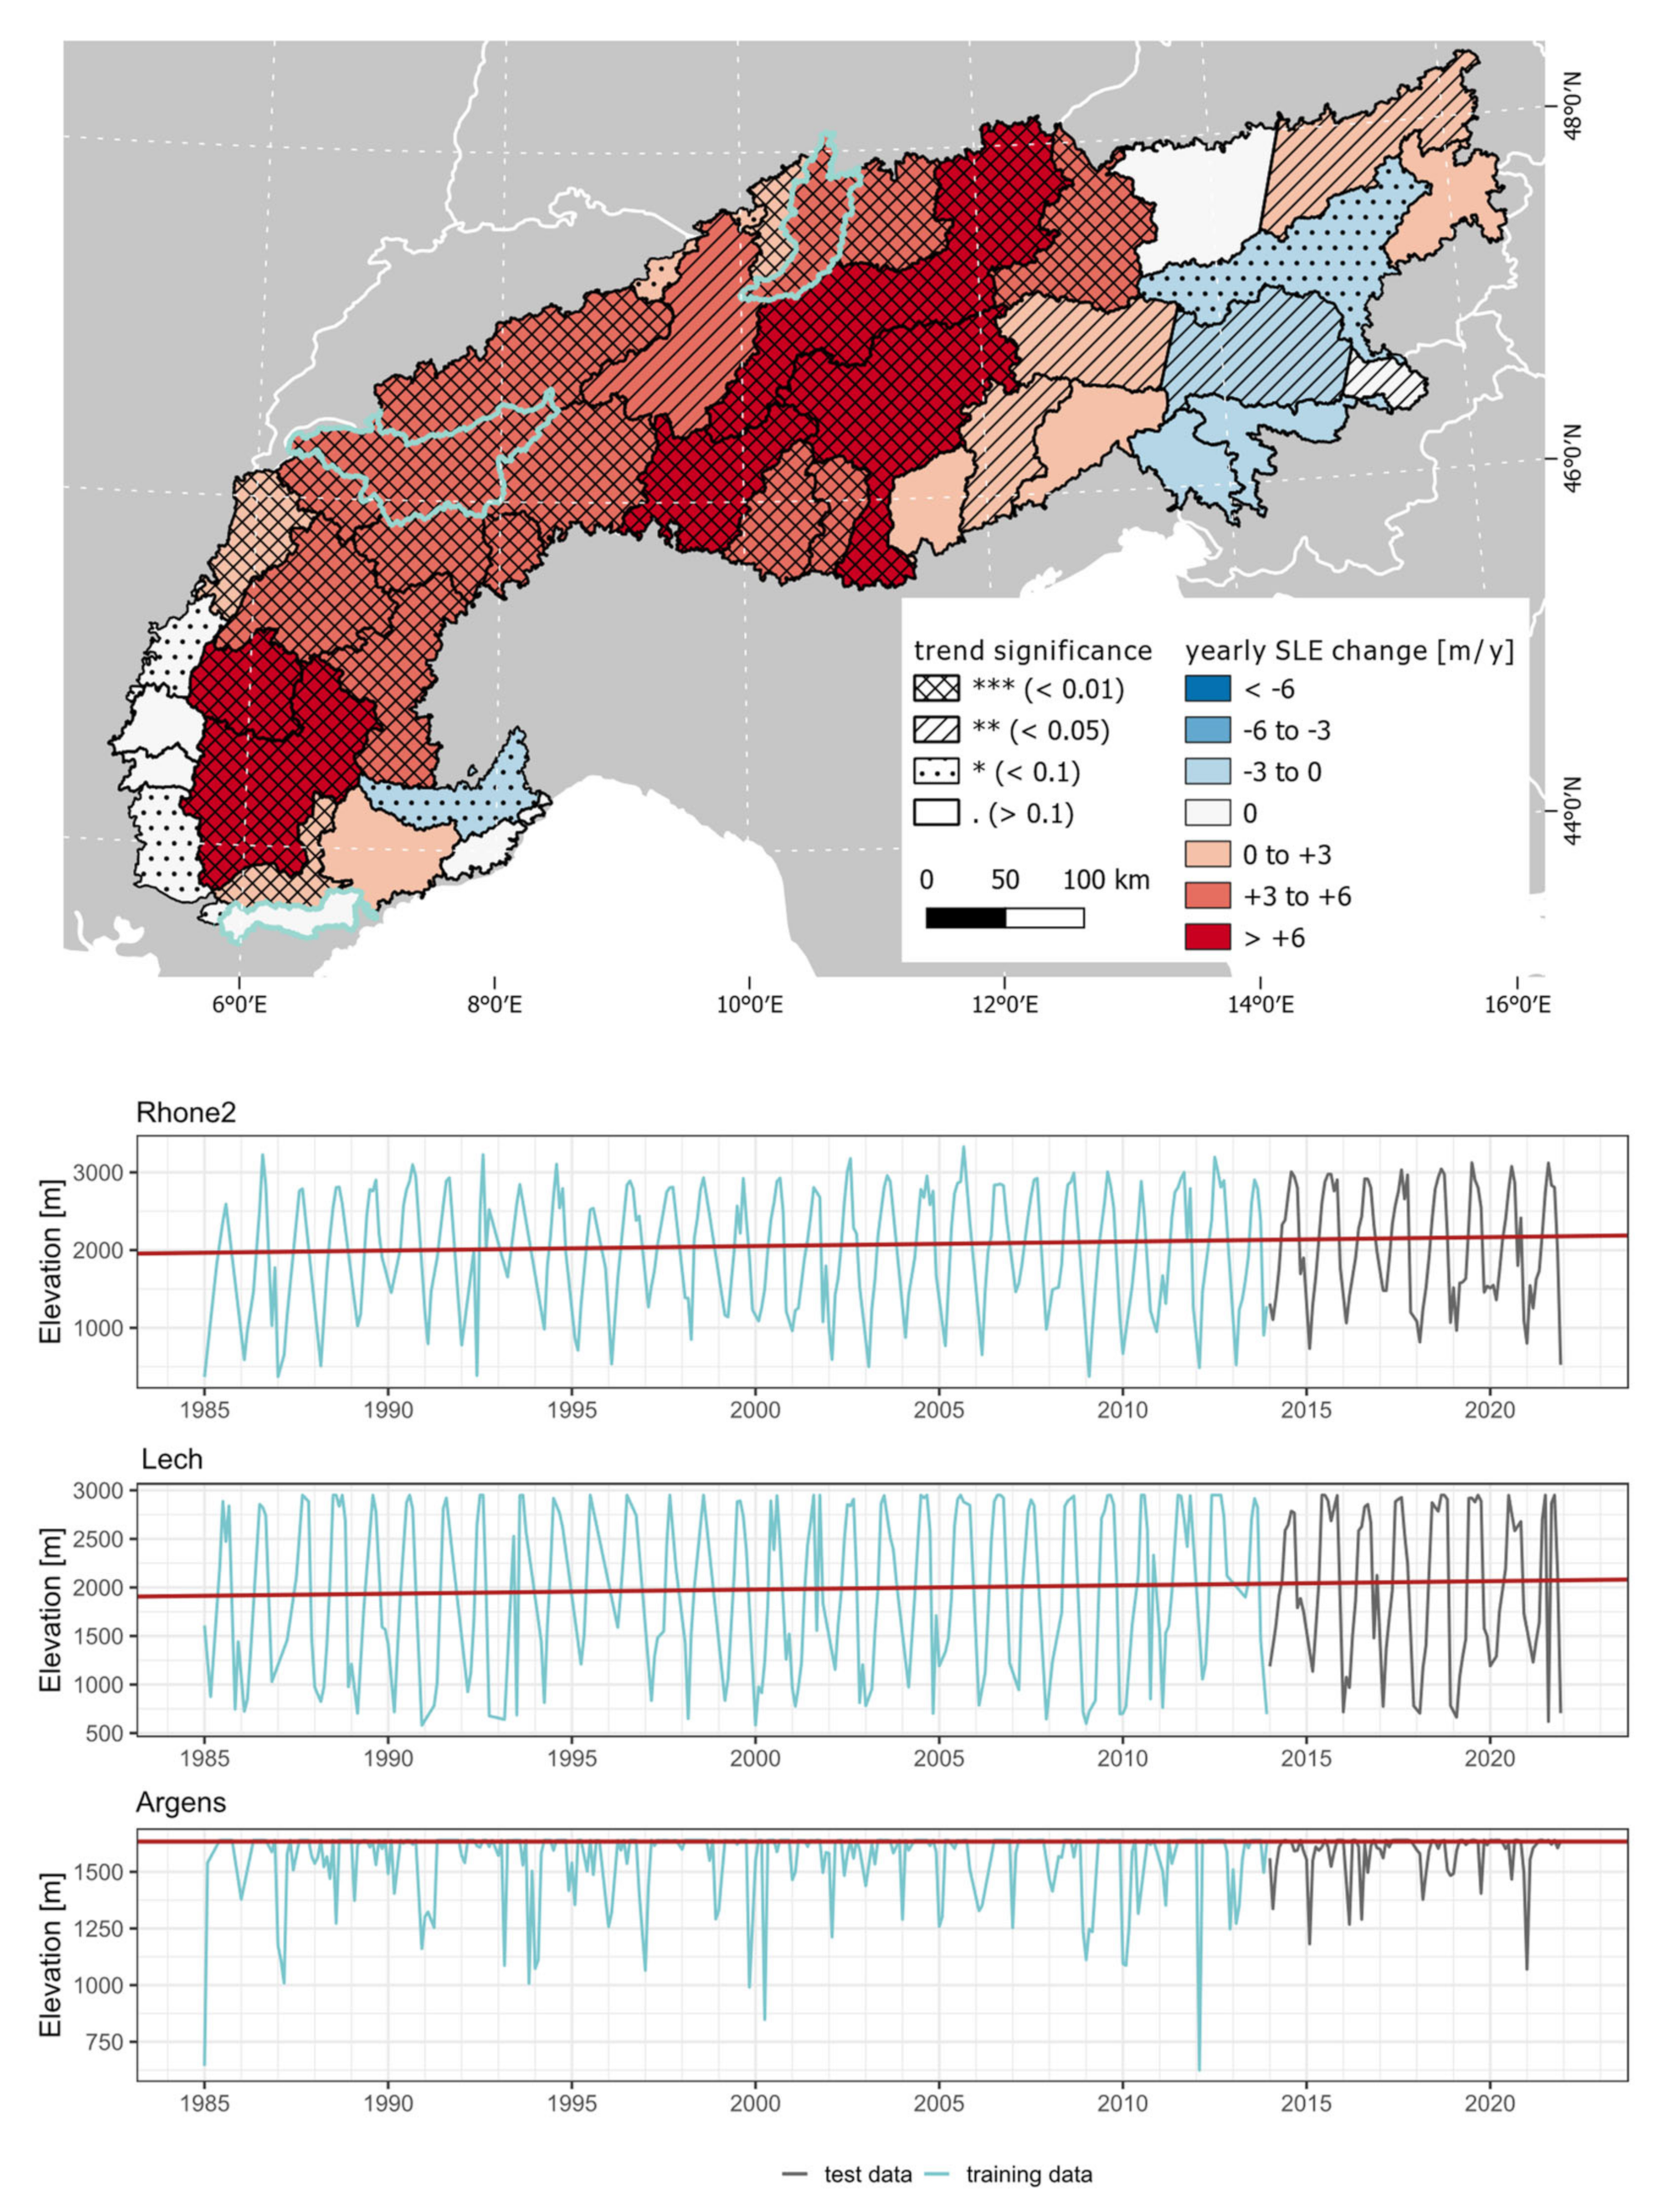 From white to green: Snow cover loss and increased vegetation productivity  in the European Alps